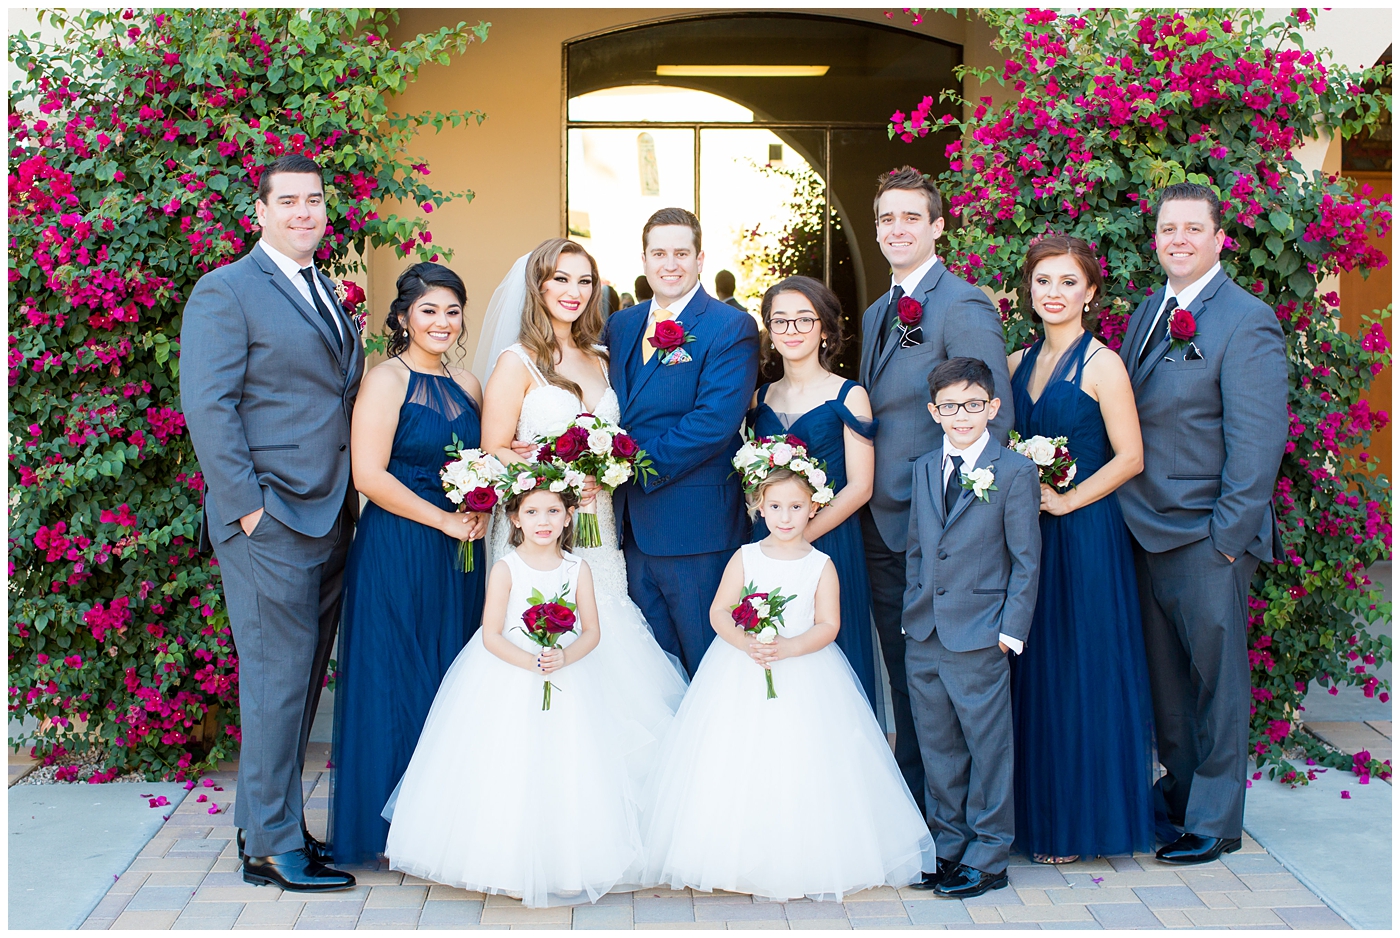 bridesmaids in blue dresses with bride in morilee wedding dress with red and white bouquet and groom in blue suit with yellow tie and red rose boutonniere and groomsmen in gray suits